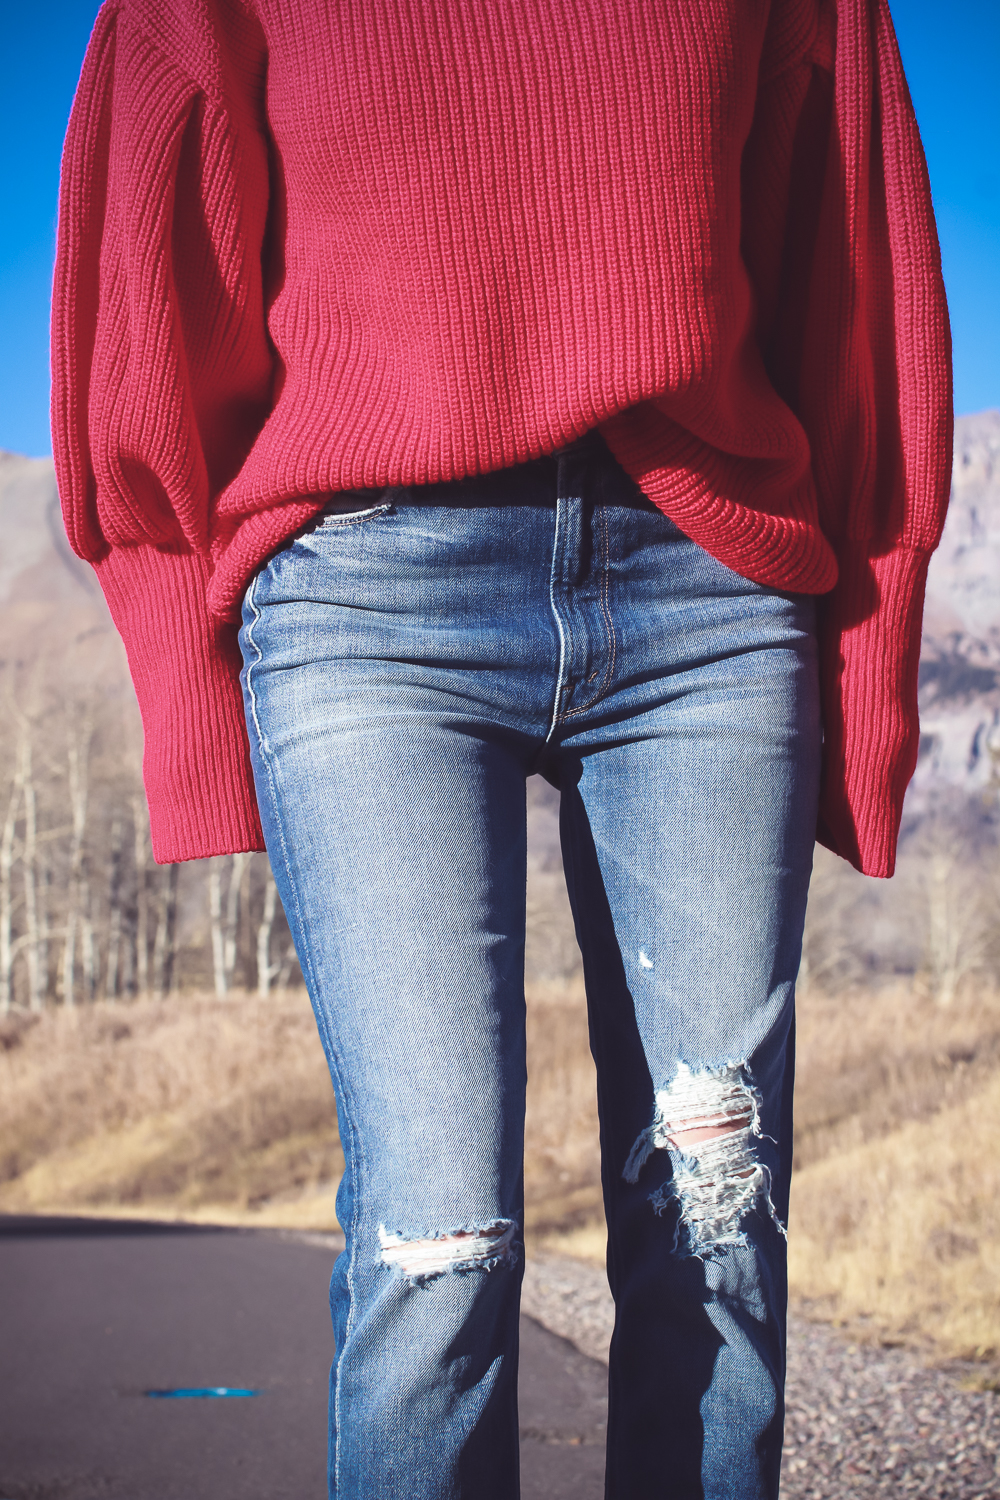 Sock Booties, what are they, how to style sock booties, featuring these red Steve Madden sock booties, Mother dazzler jeans, and a red oversized topshop turtleneck sweater